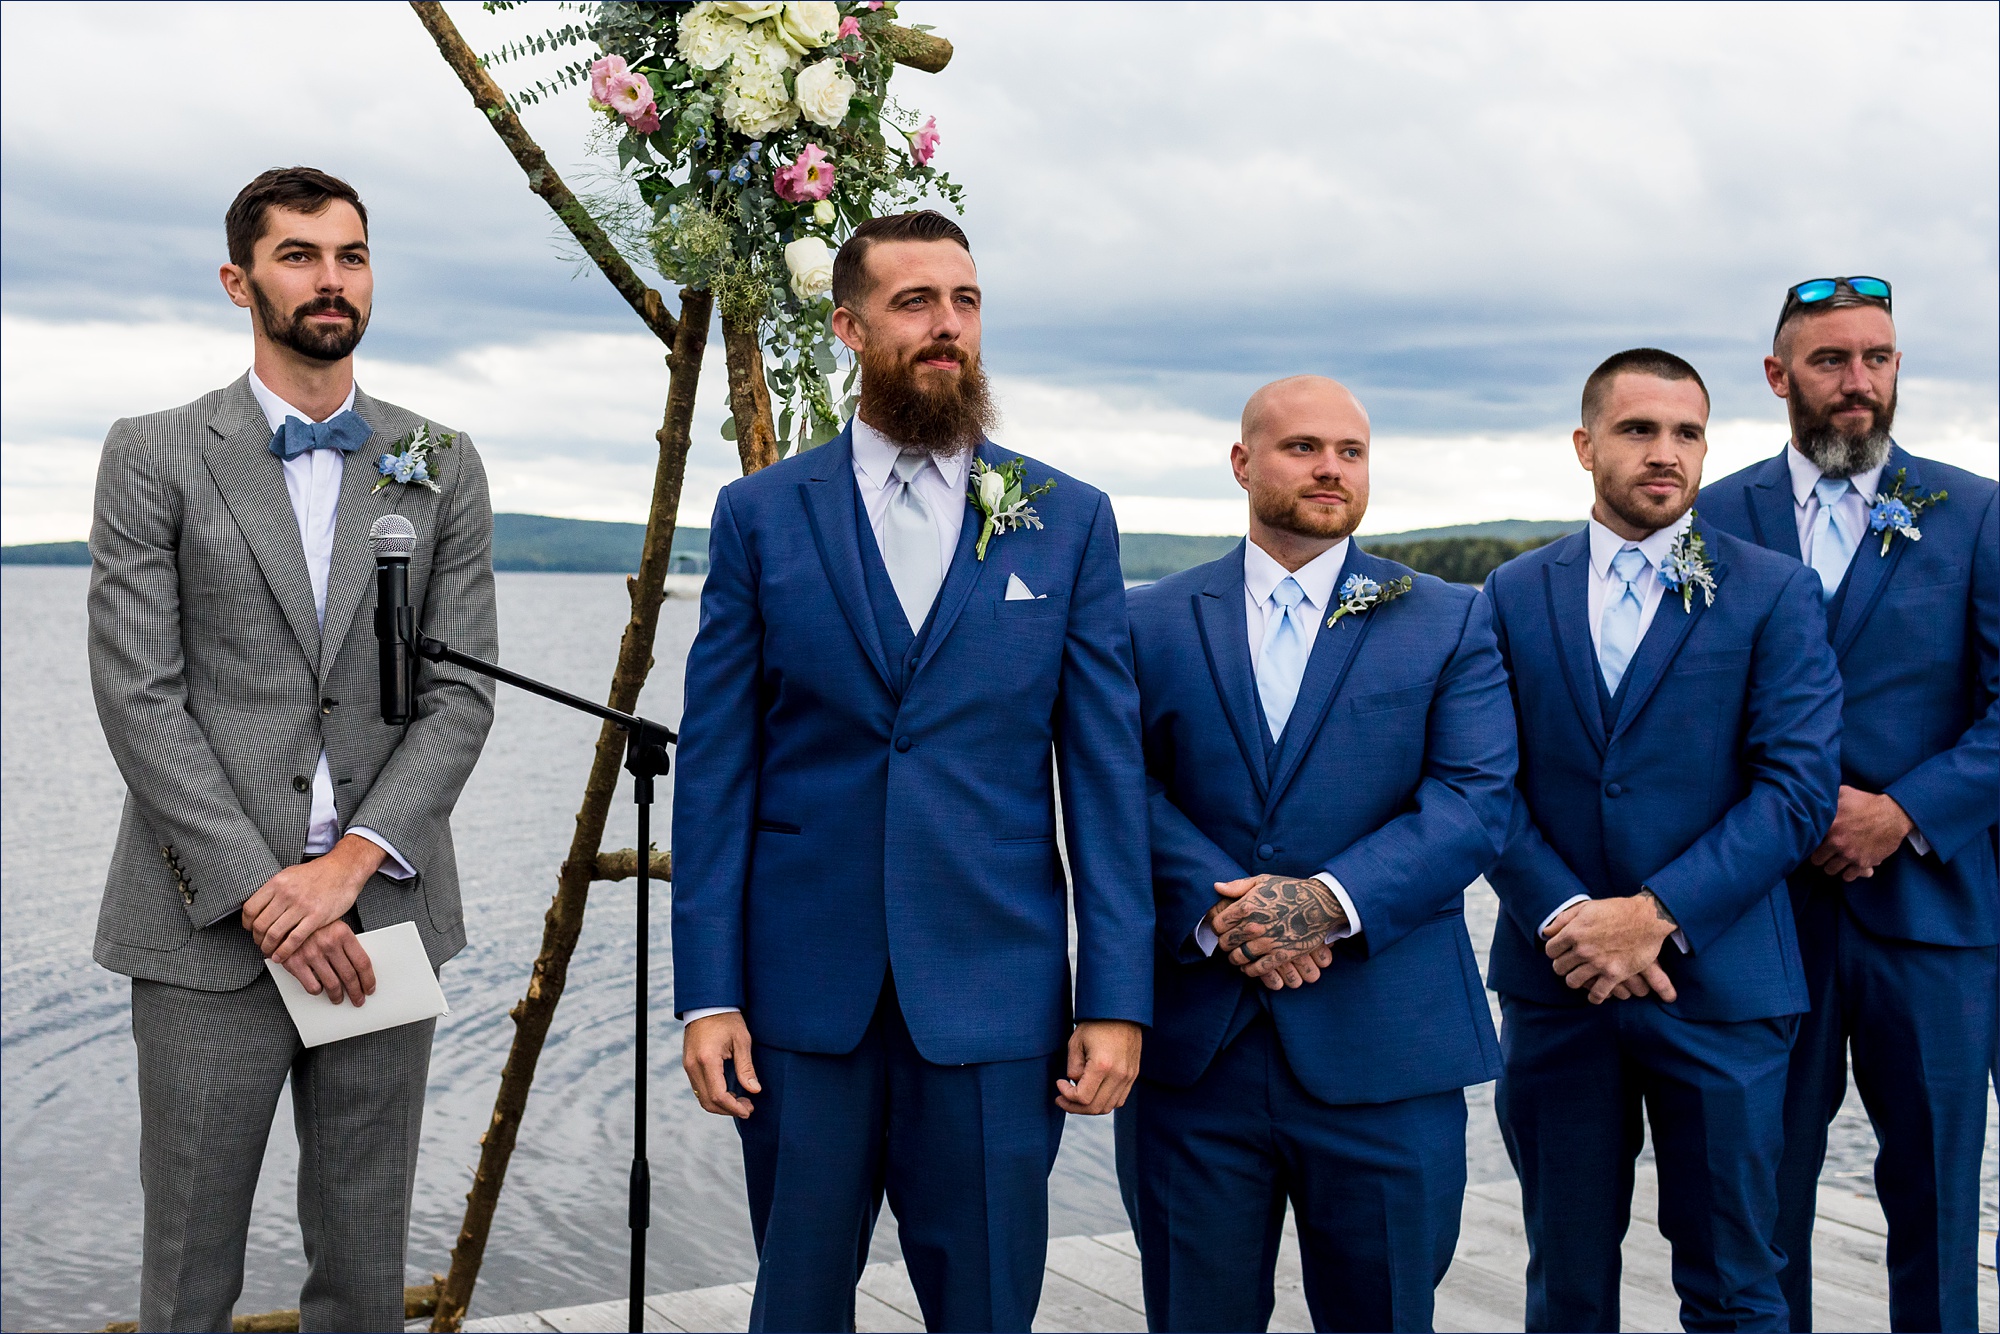 The groom watches as the bride comes down the aisle of the dock ceremony